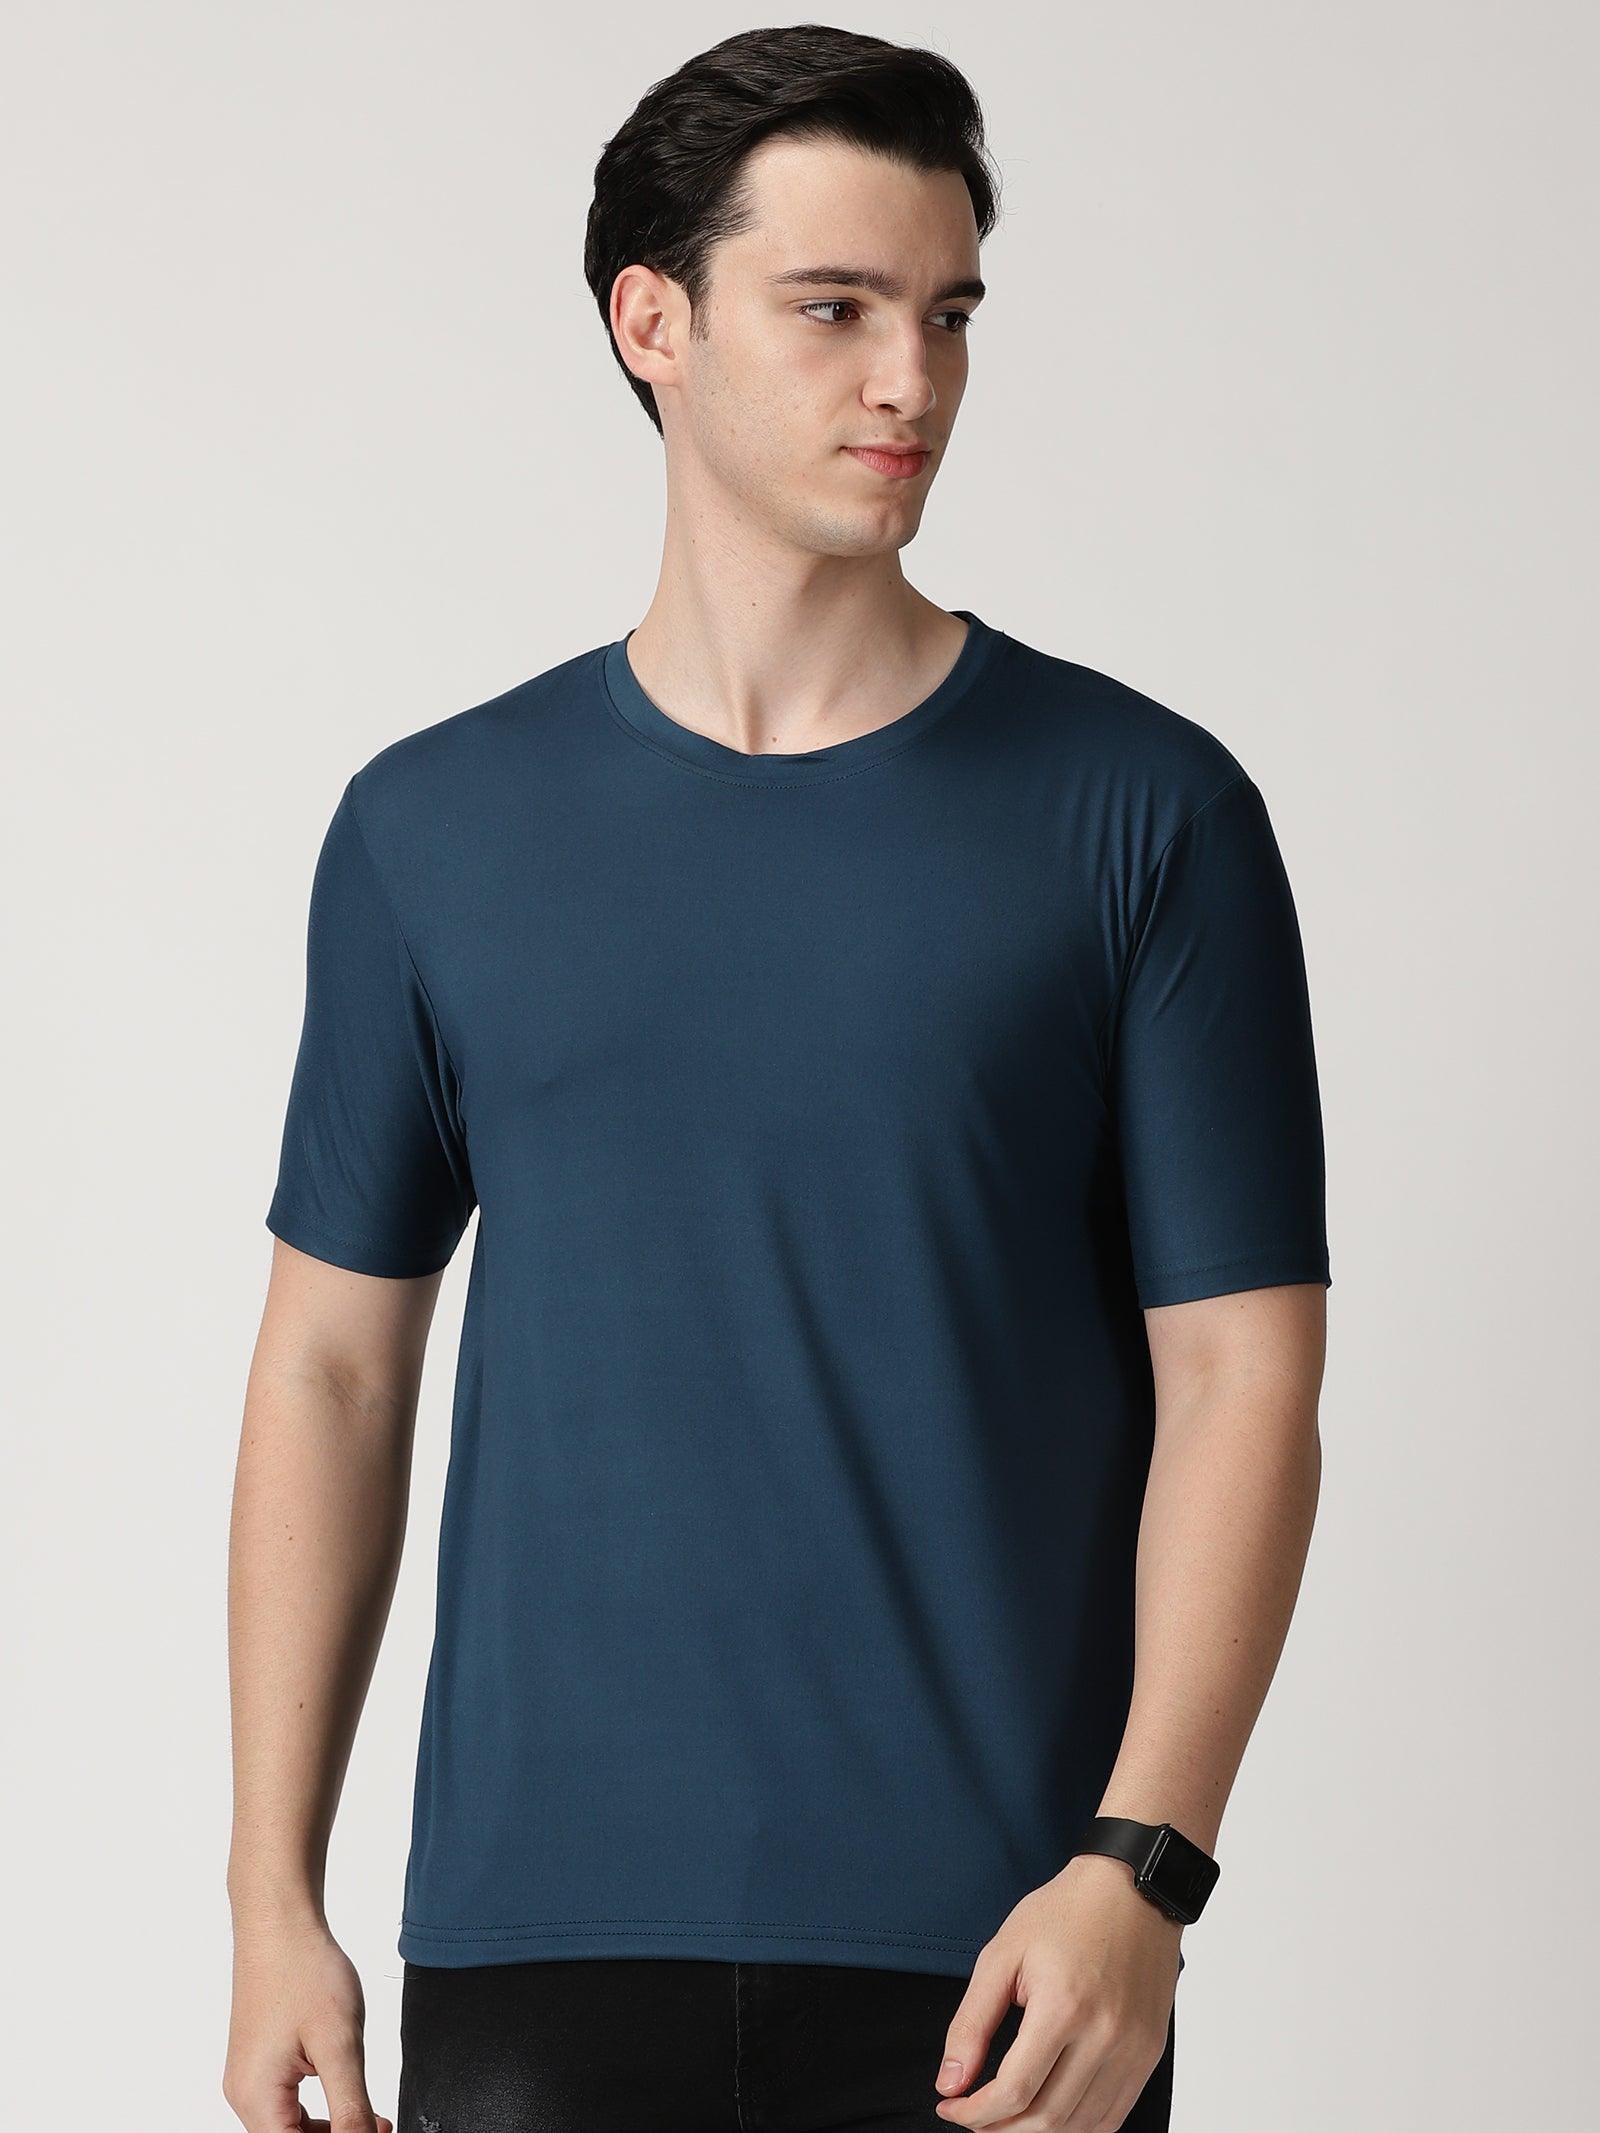 Travel Tee™ | The 360* Comfort Wear For Travelling - Blue Tyga